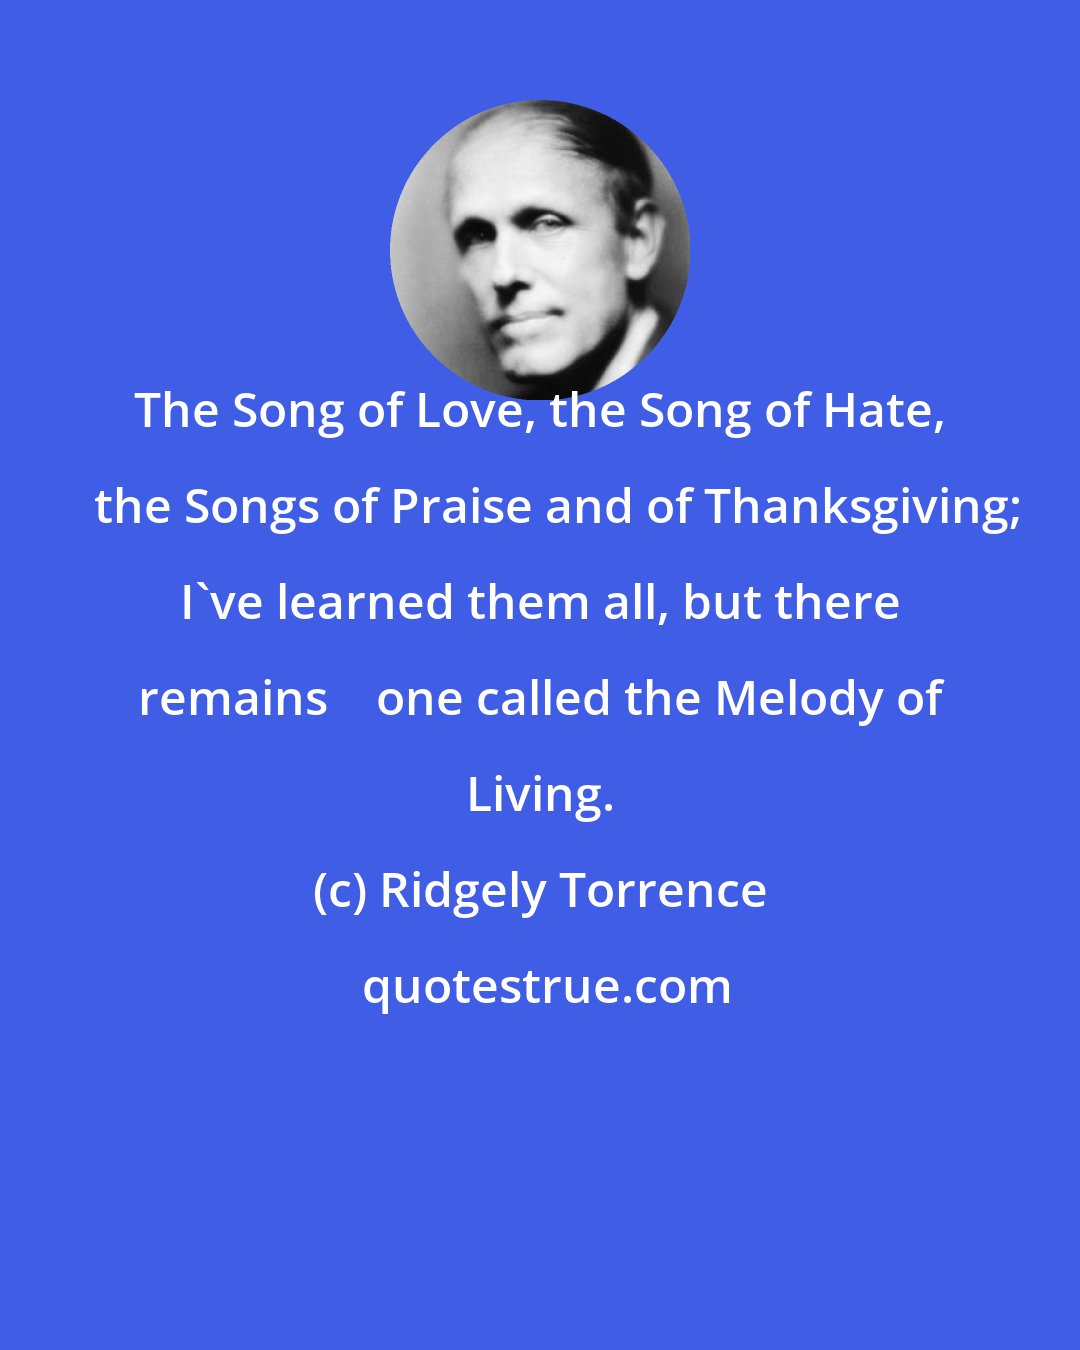 Ridgely Torrence: The Song of Love, the Song of Hate,    the Songs of Praise and of Thanksgiving; I've learned them all, but there remains    one called the Melody of Living.